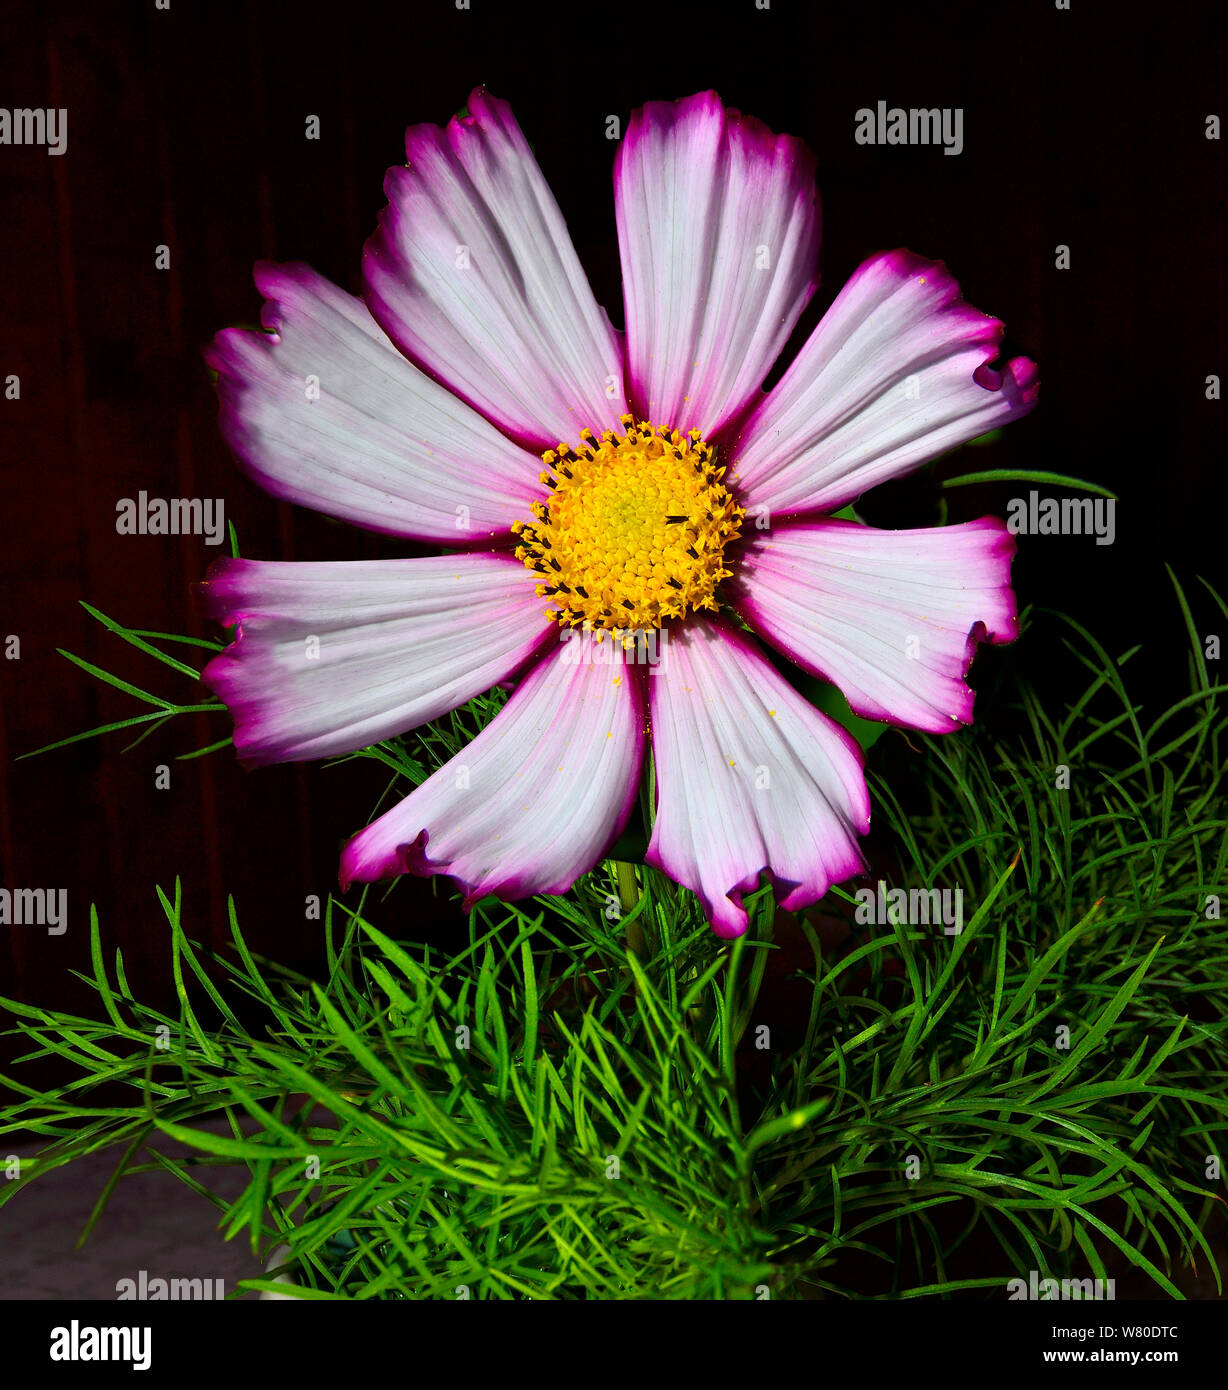 Vintage pink Cosmea flower with green leaves close up on black background. Beautiful single Cosmos flower with delicate pink with magenta edges of pet Stock Photo